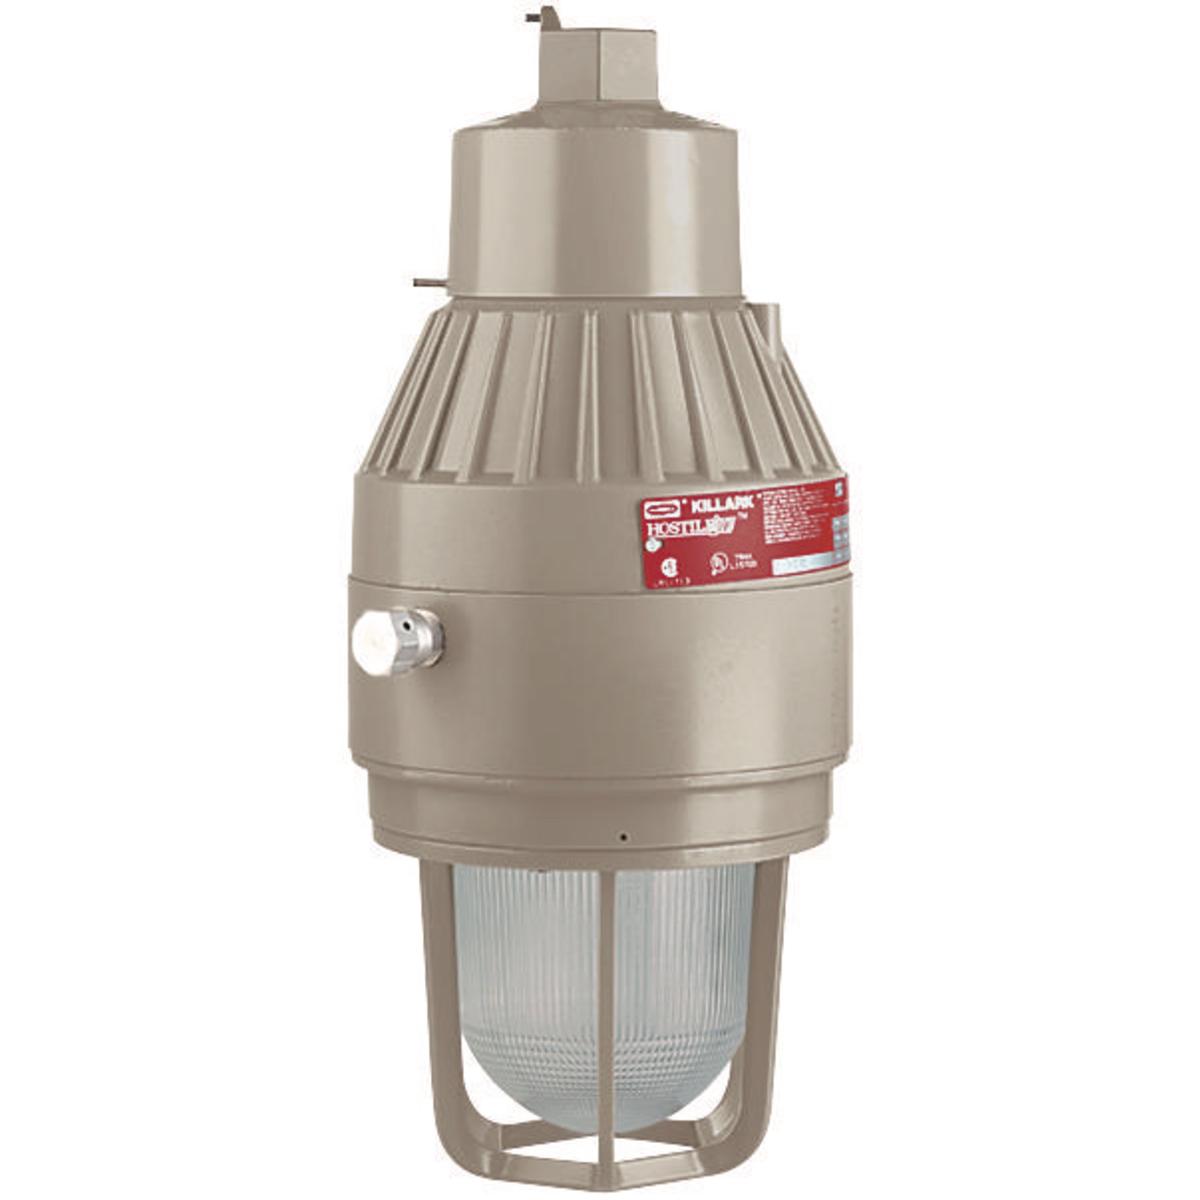 Hubbell EEQ2626E10A2GG 26W Fluorescent 120/277V 3/4"Pendant with Globe and Guard  ; Quad-Pin long-life triple-tube compact ; Fluorescent lamps included ; Choice of Pendant, Ceiling, Wall or Stanchion mount ; Factory Sealed - No external seal required ; Corrosion resistant-Coppe